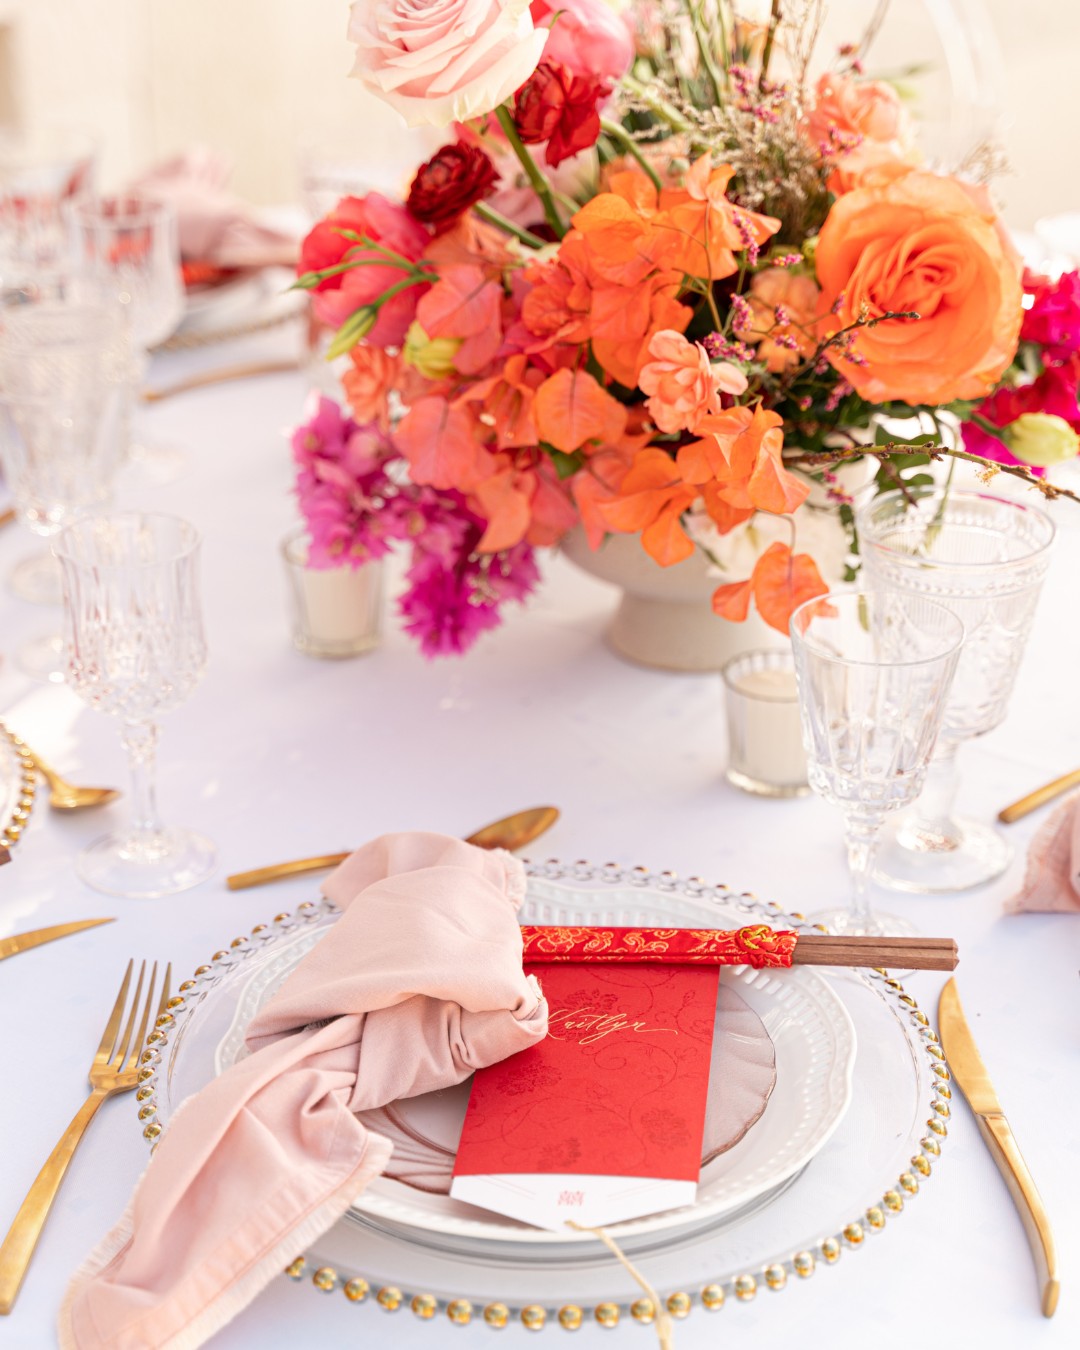 Red and orange floral centerpieces